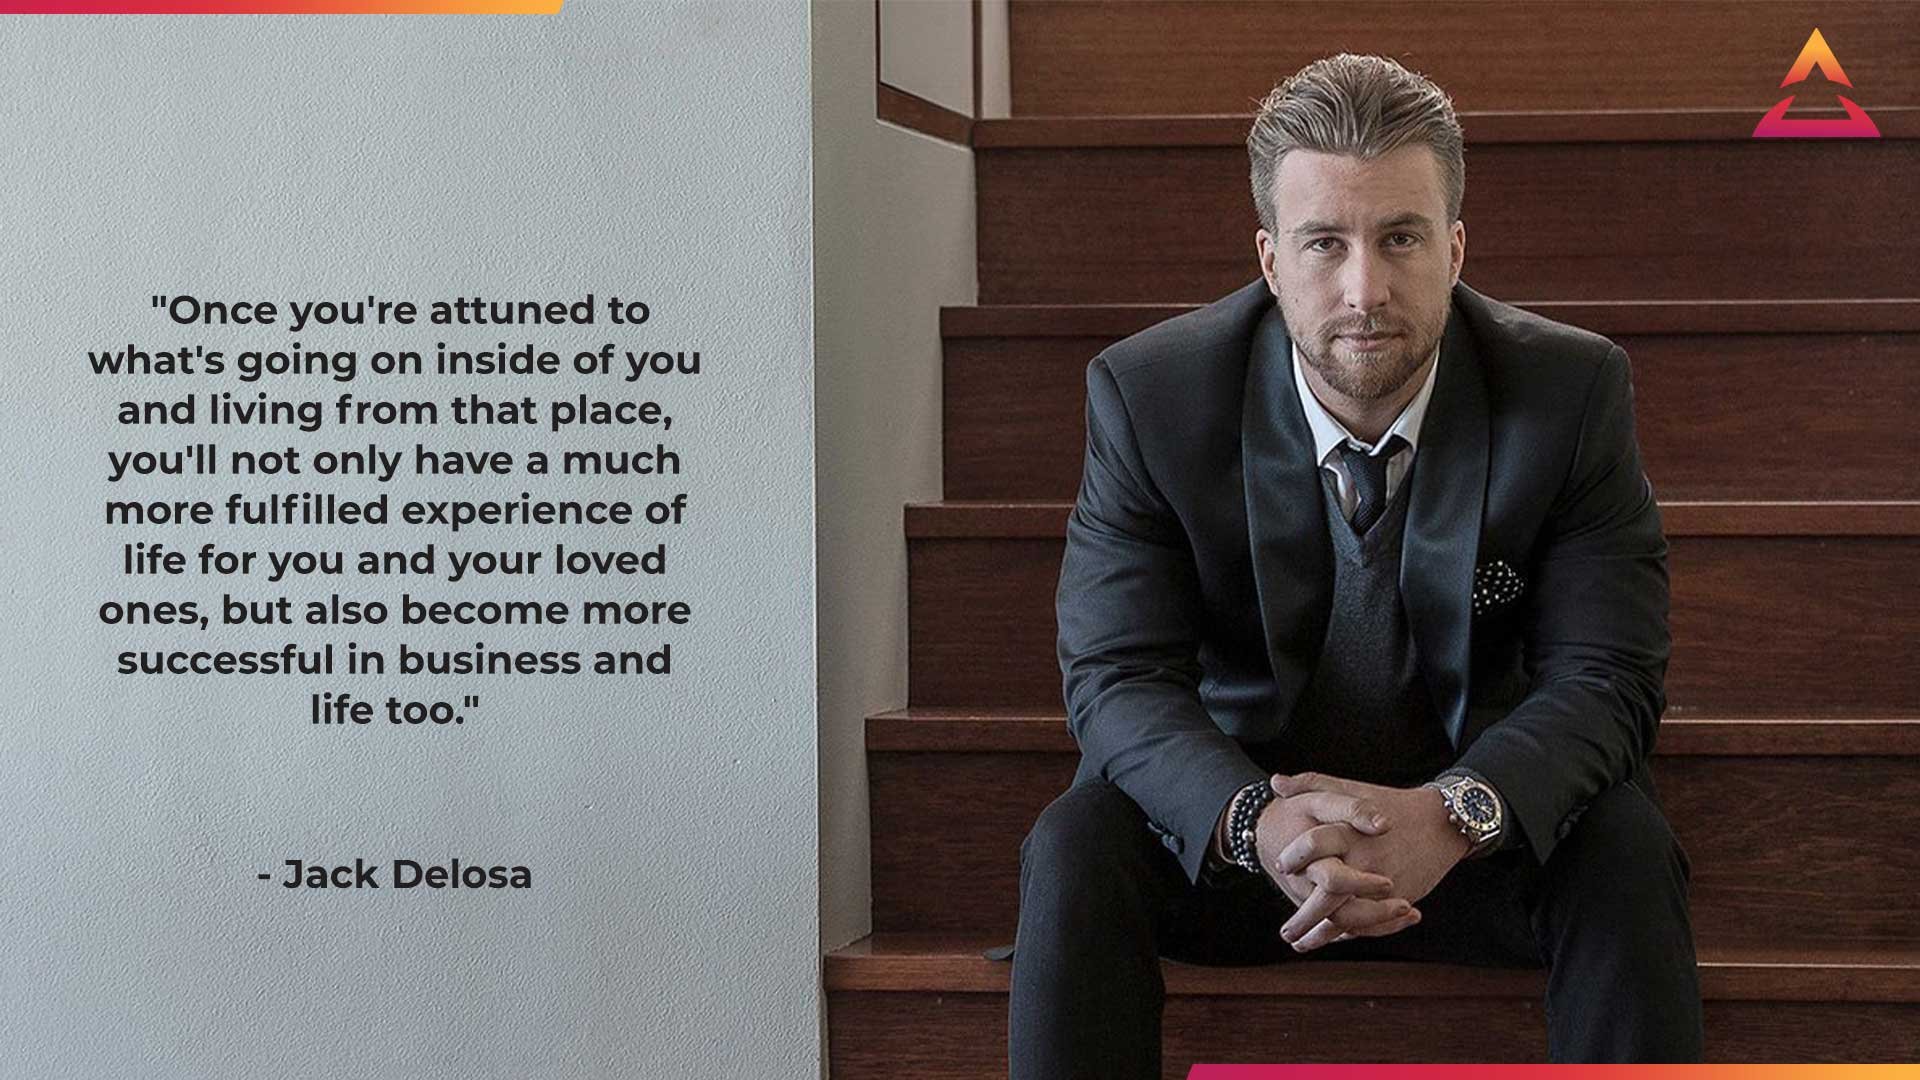 Jack Delosa, Founder of The Entourage quote - Once you're attuned to what's going on inside of you and living from that place, you'll not only have a much more fulfilled experience of life for you and your loved ones, but also become more successful in business and life too.